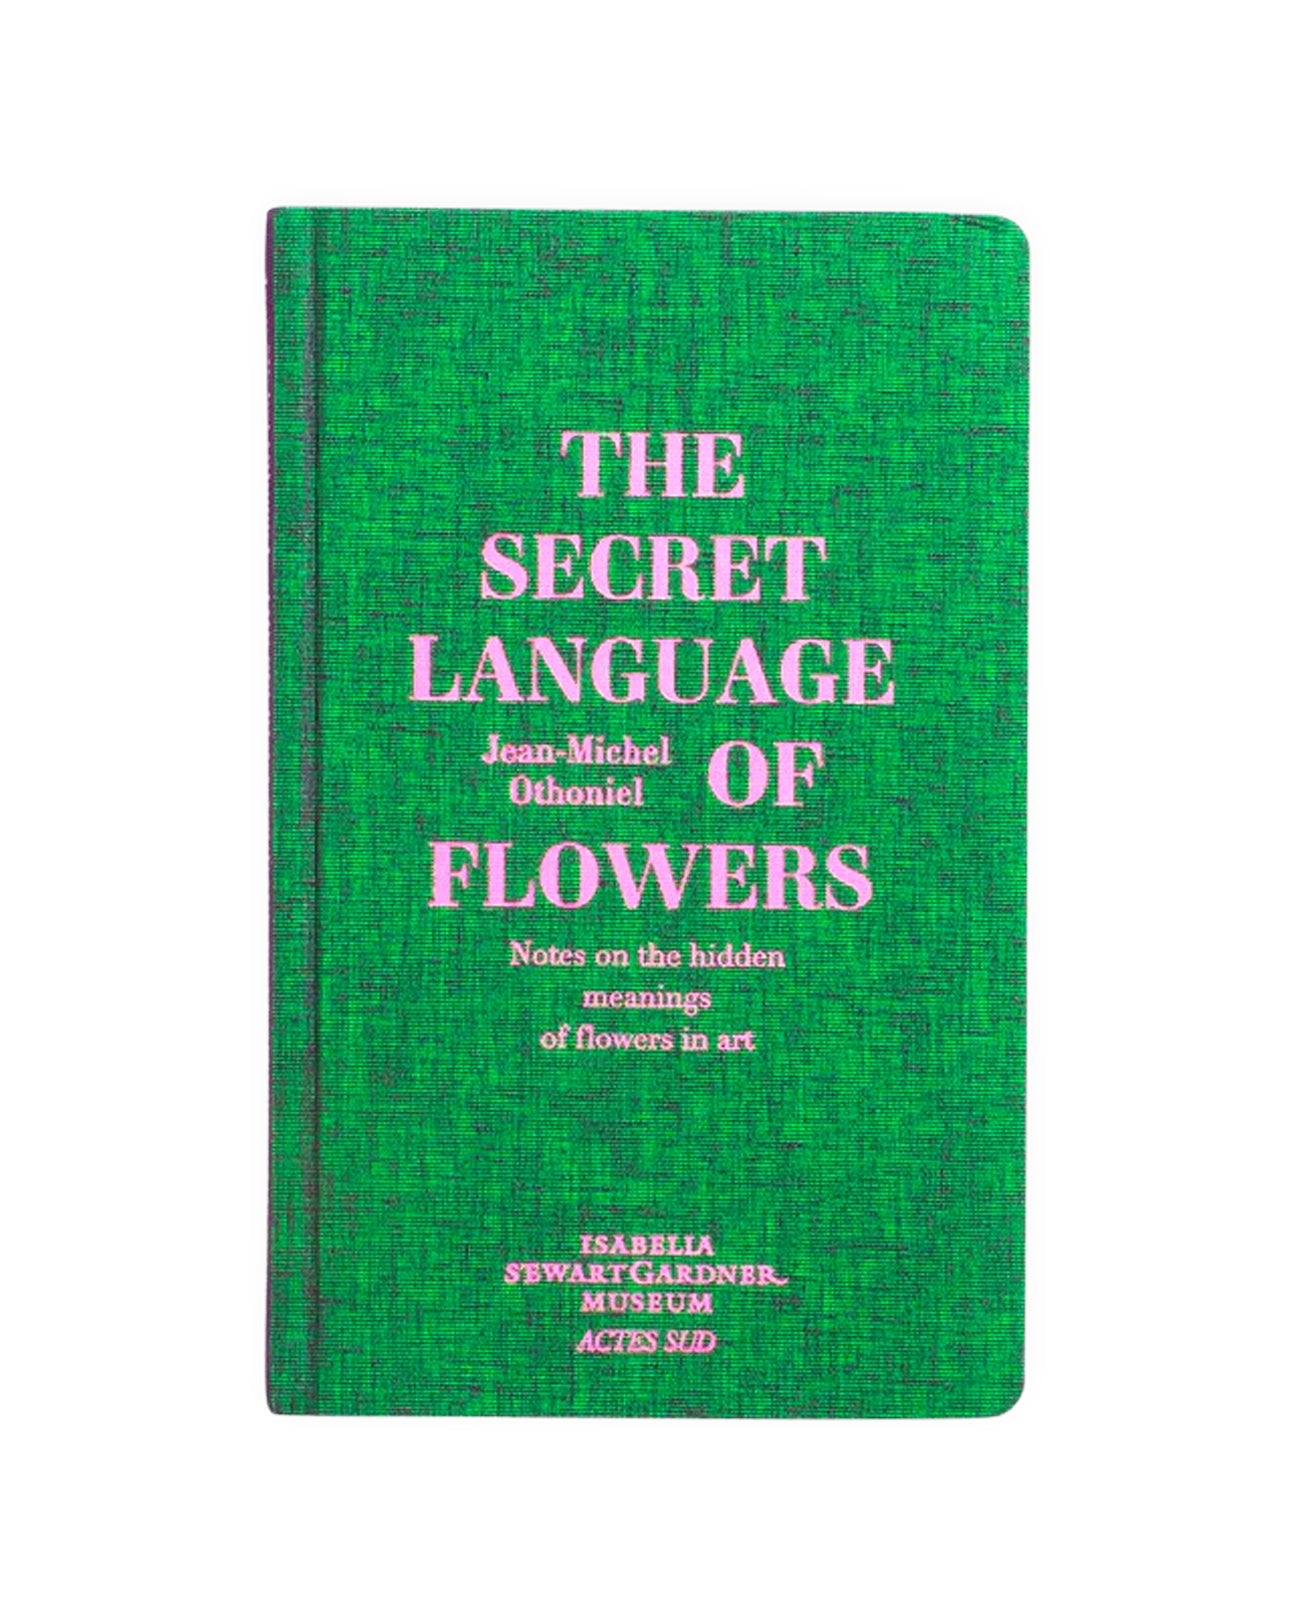 The Secret Language of Flowers: Notes on the Hidden Meanings of Flowers in Art Hardback by Jean-Michel Othoniel